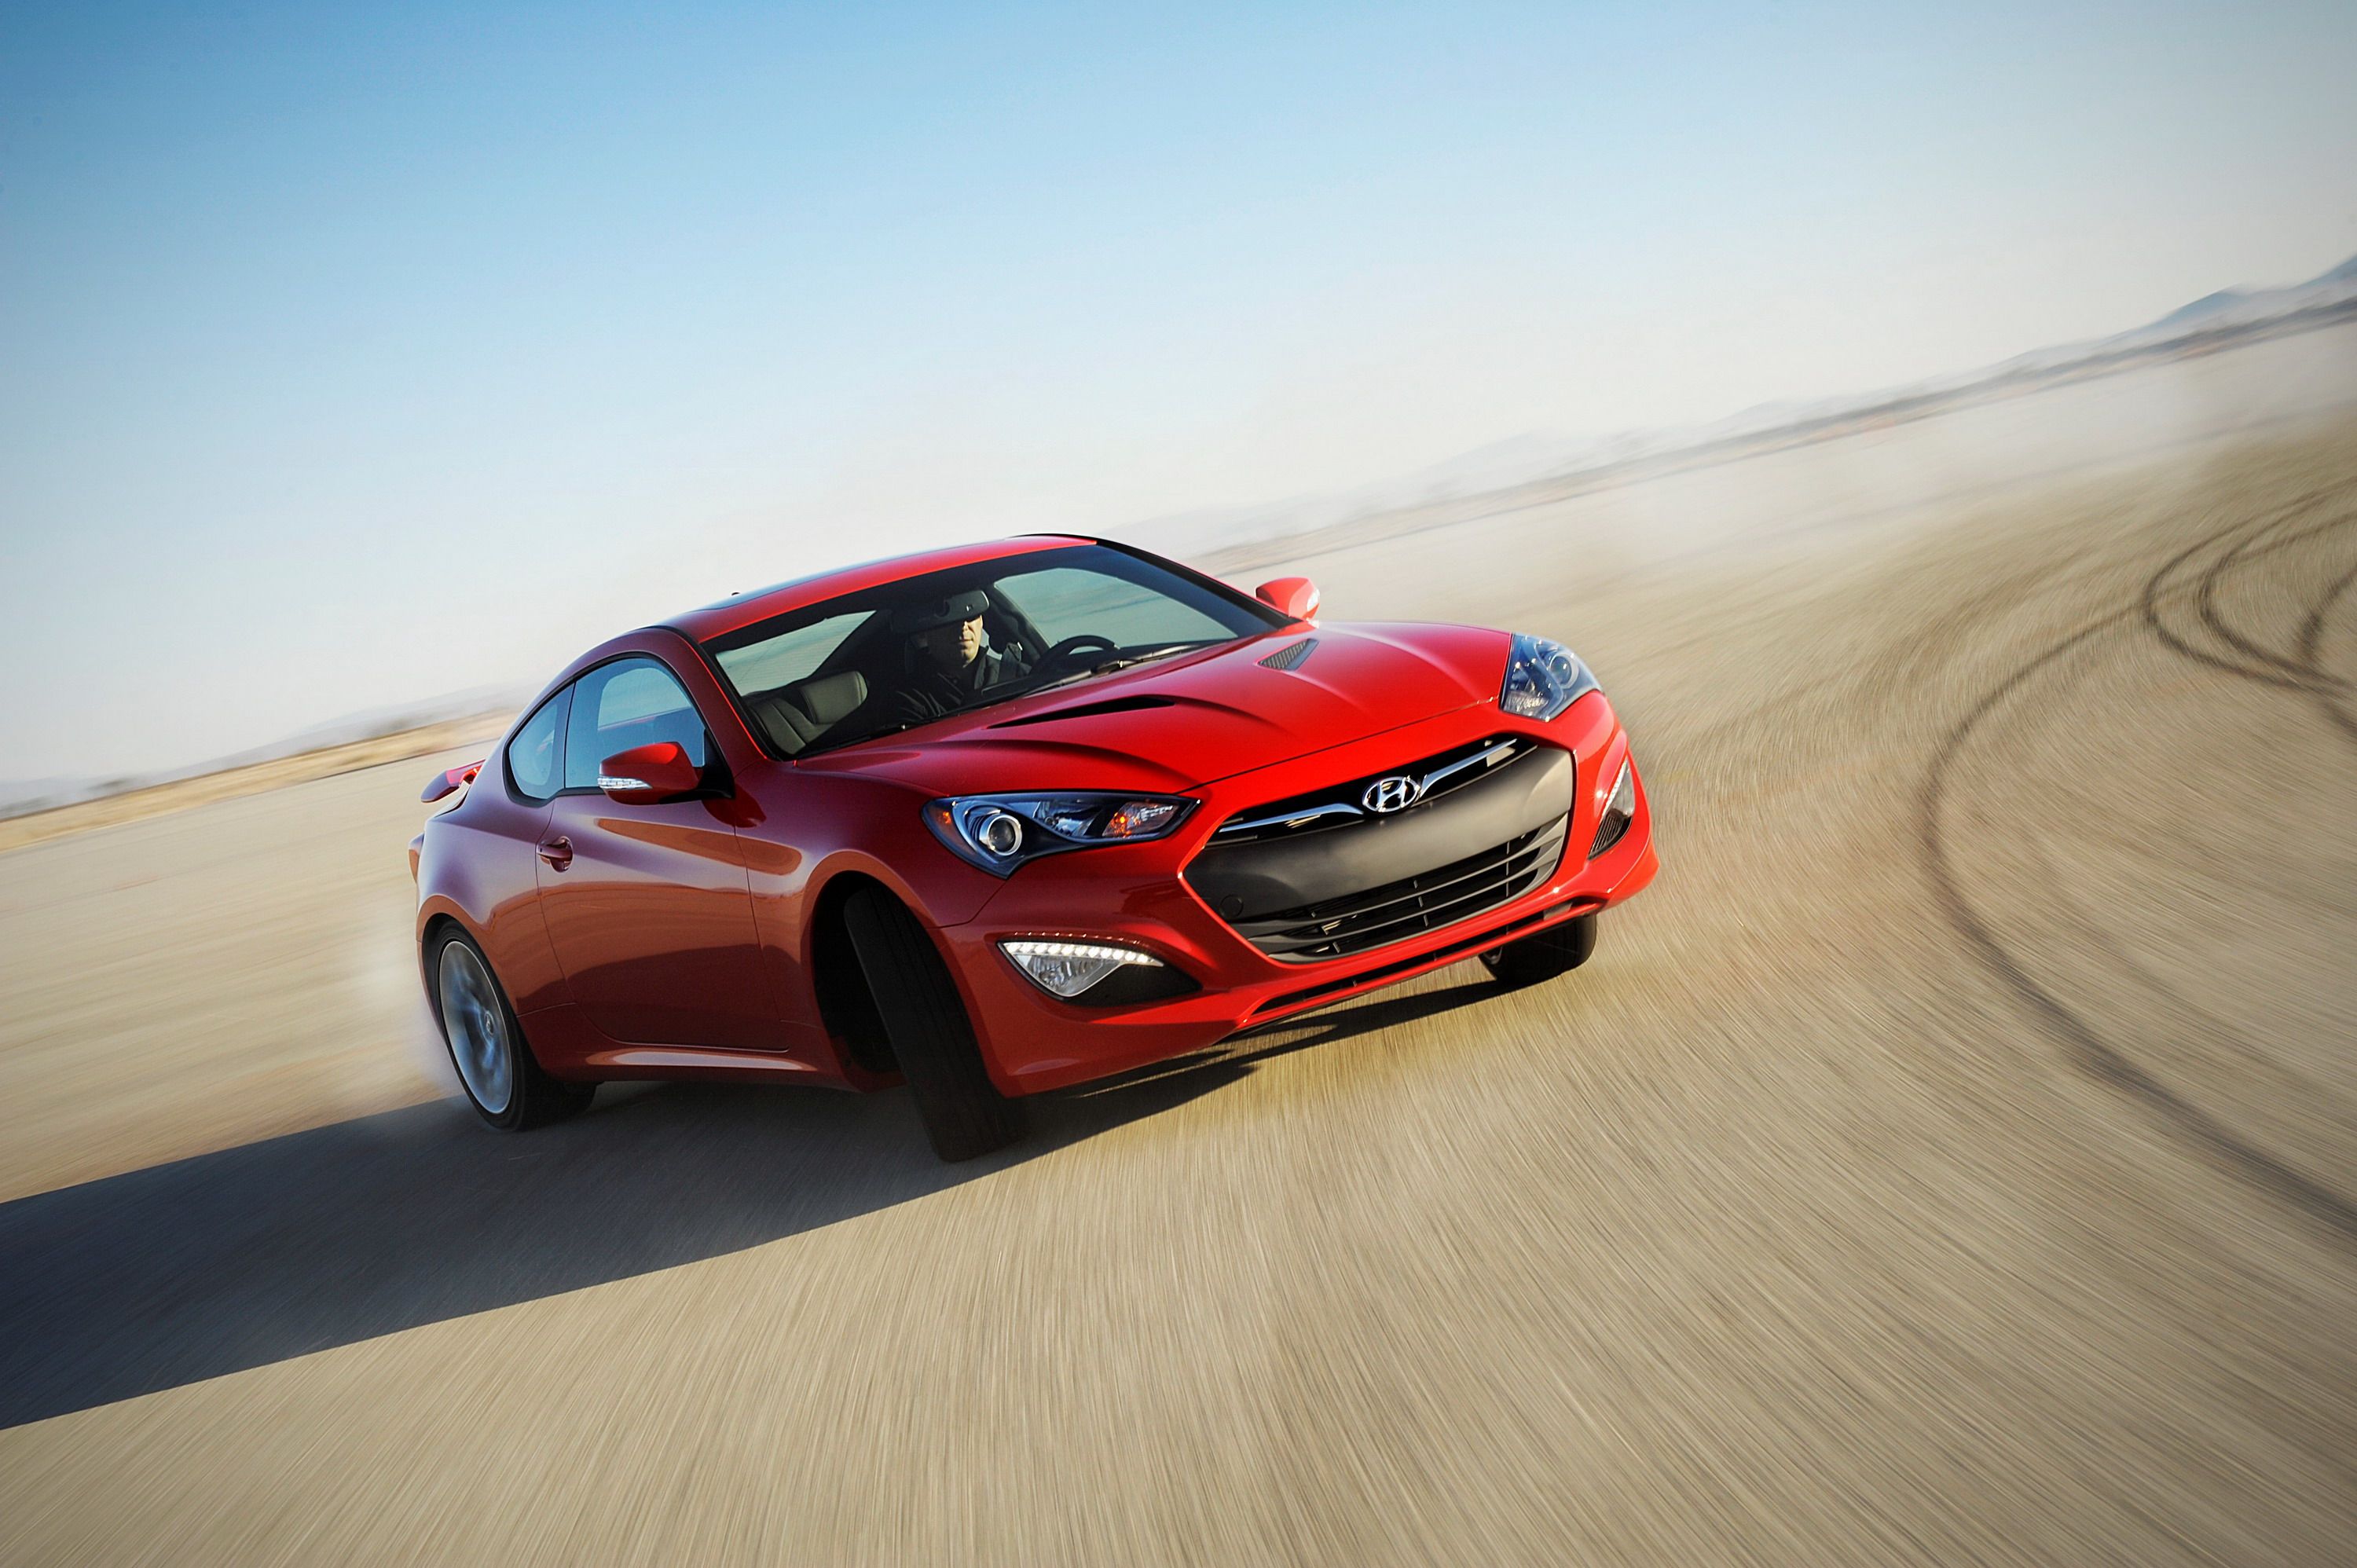 2014 Hyundai Genesis Coupe 2.0T Dropped for 2015